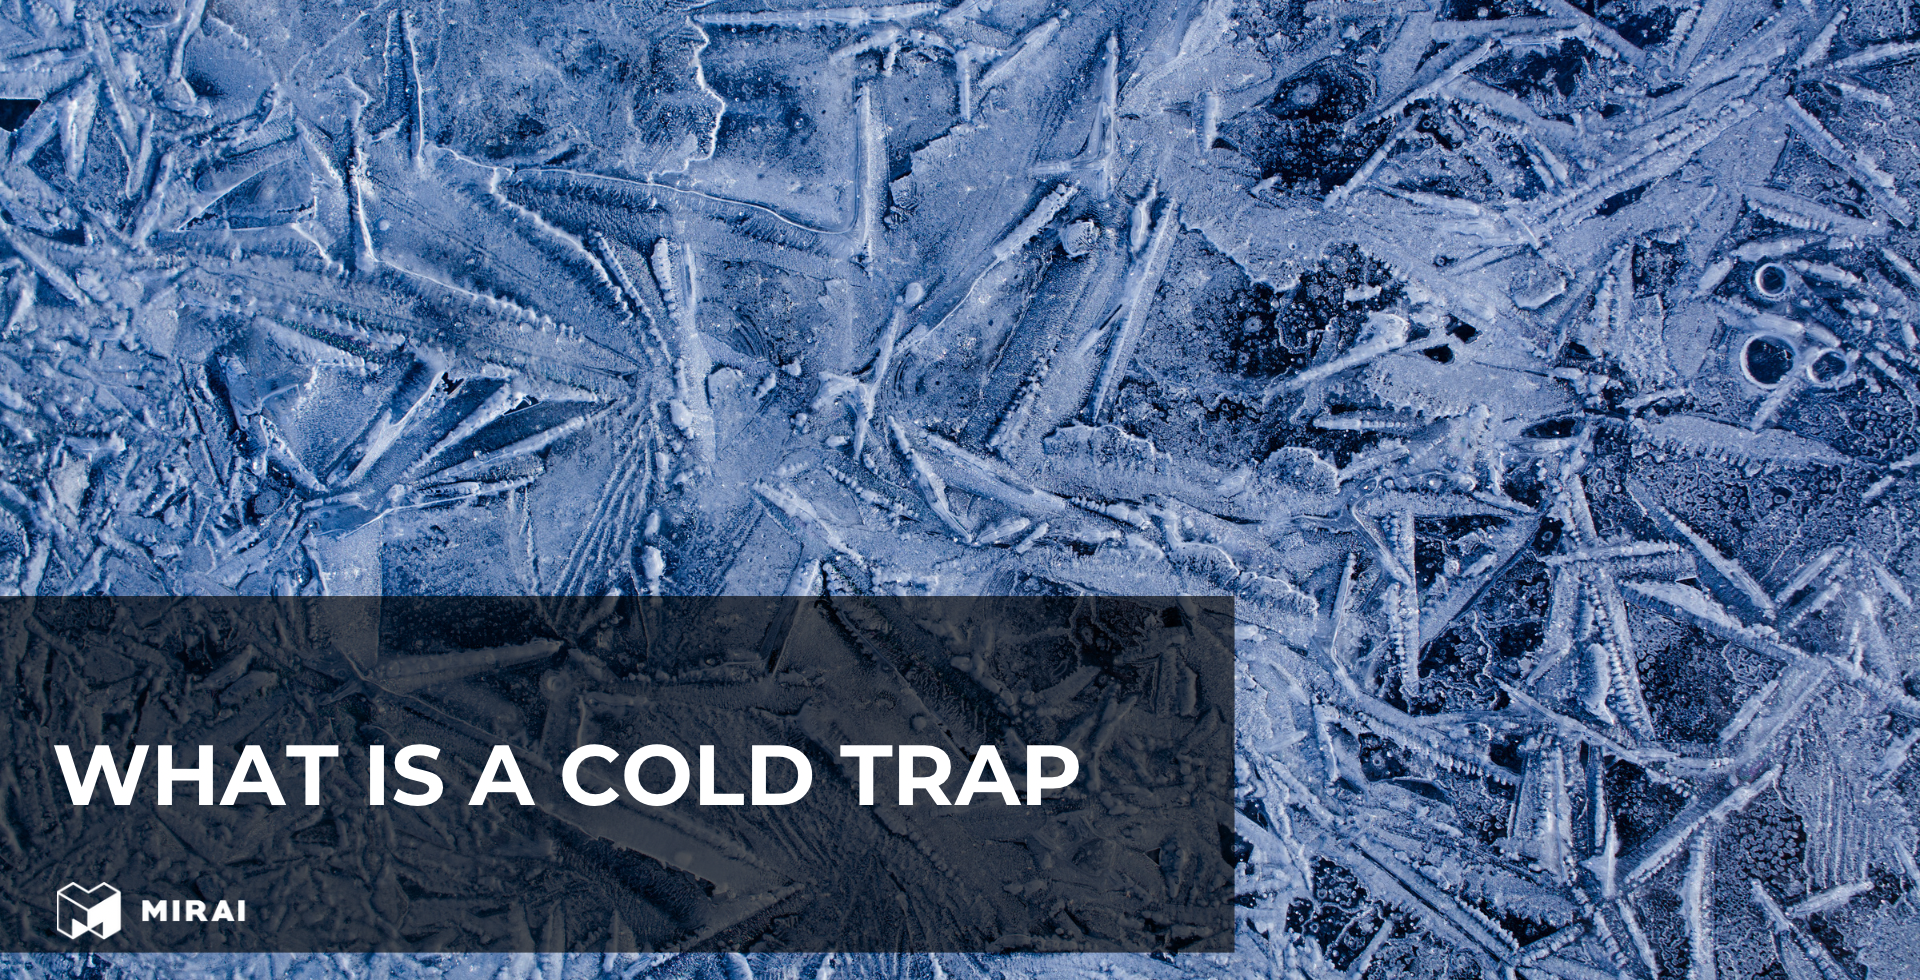 What is a cold trap